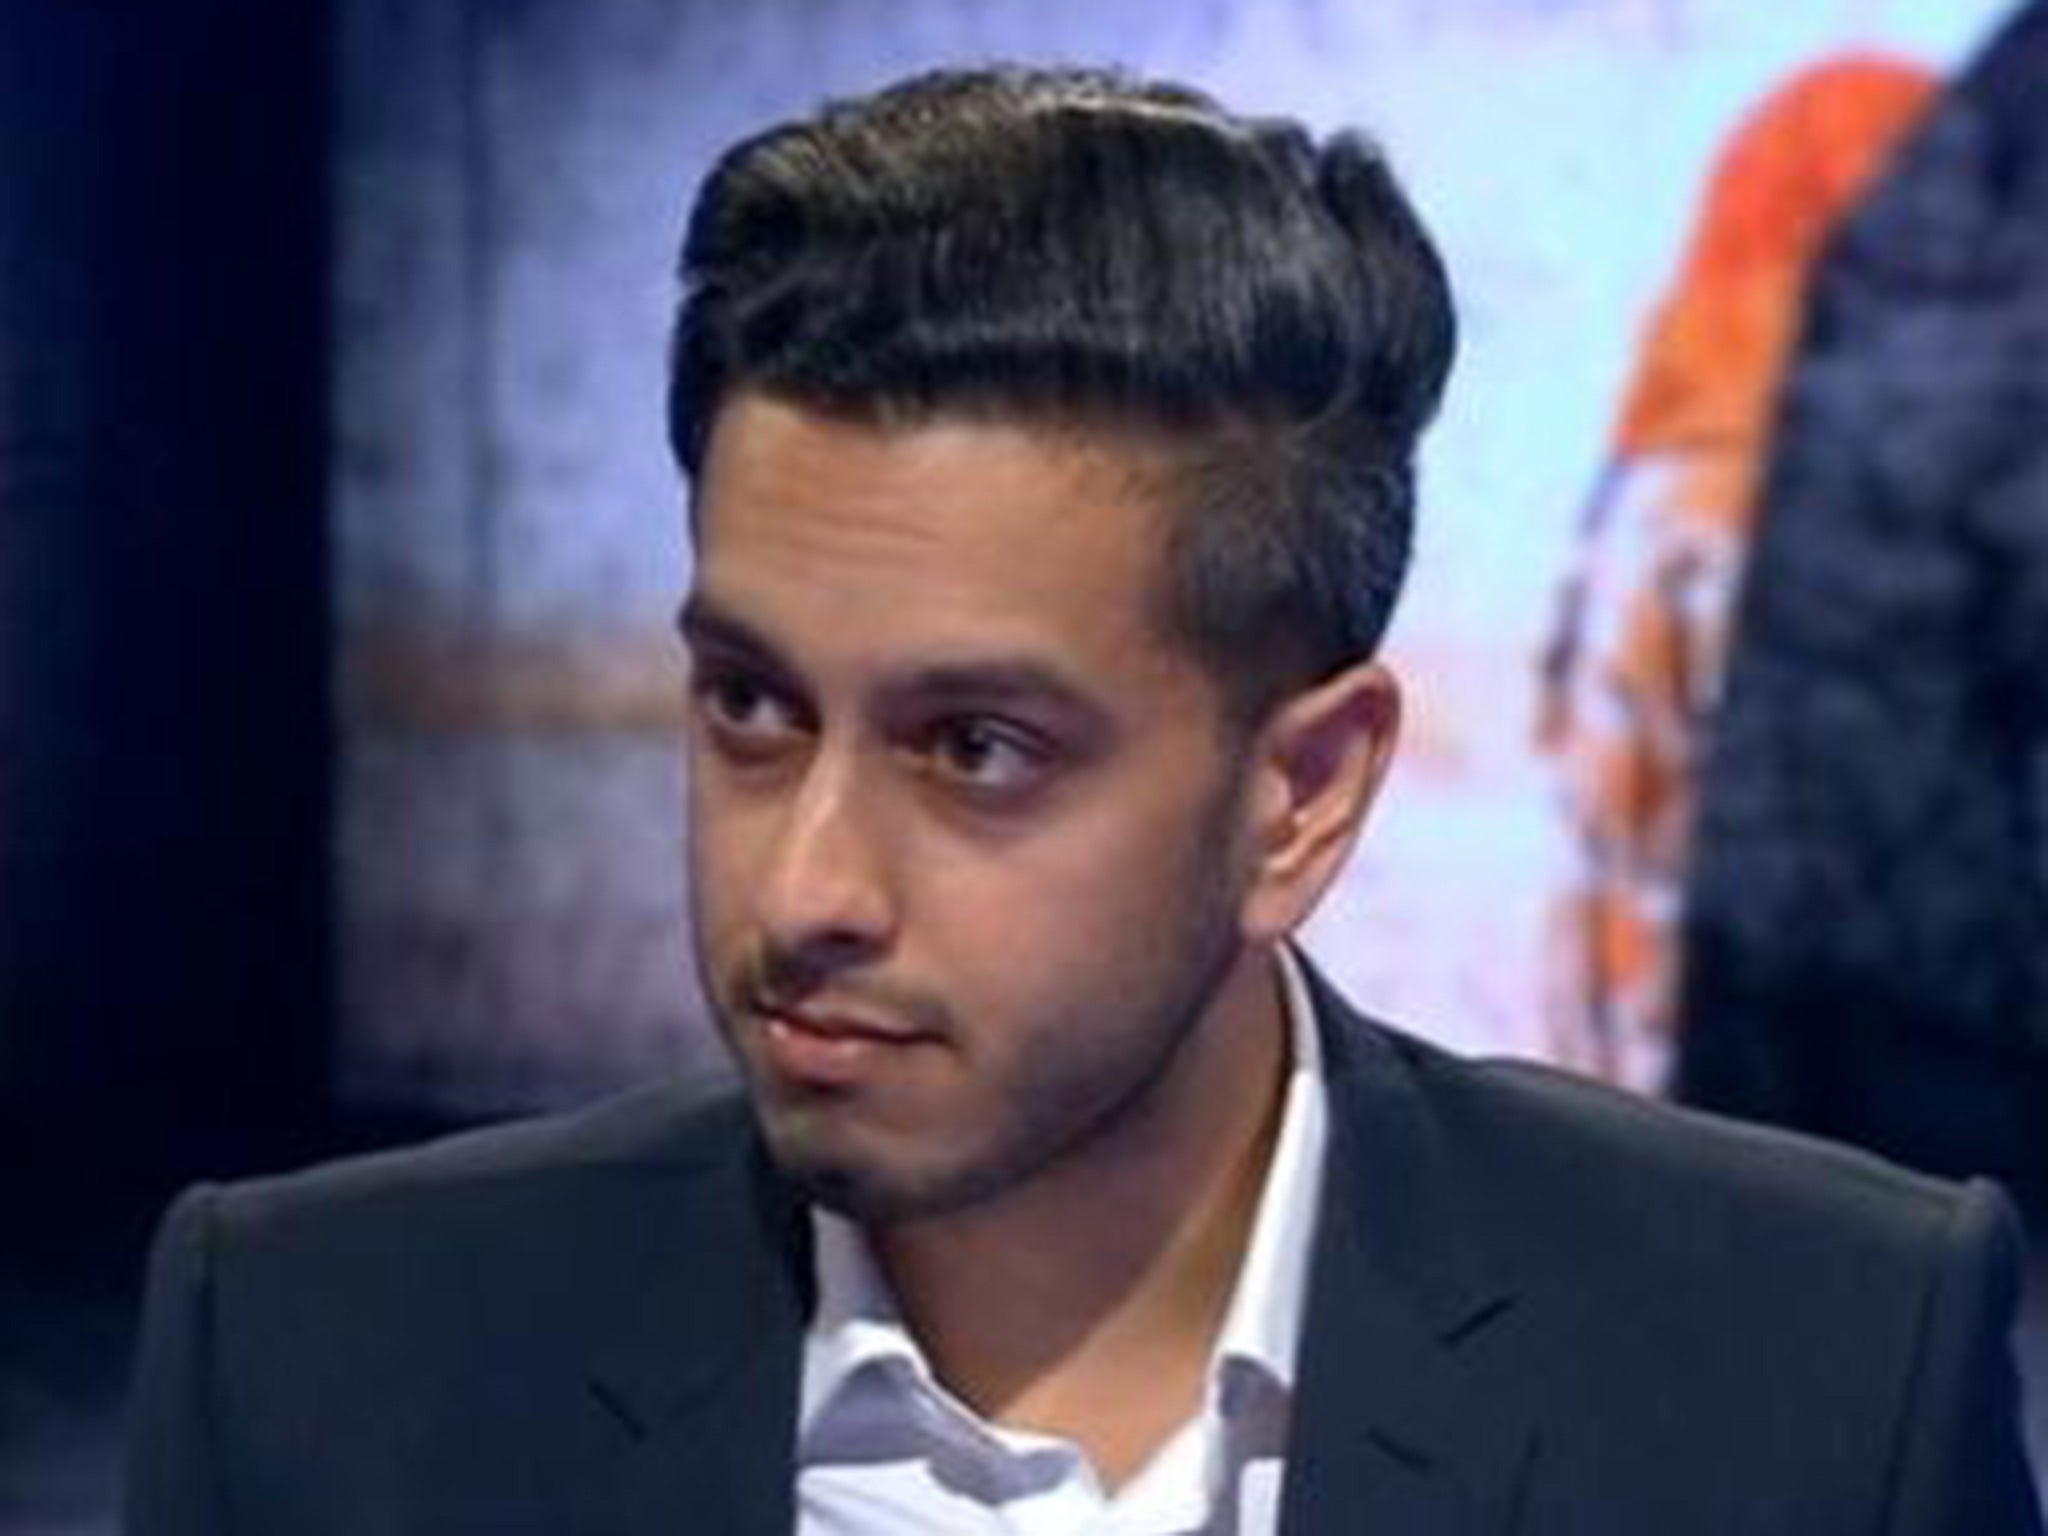 BBC ‘Newsnight’ reporter Secunder Kermani had his laptop seized by anti-terror police officers